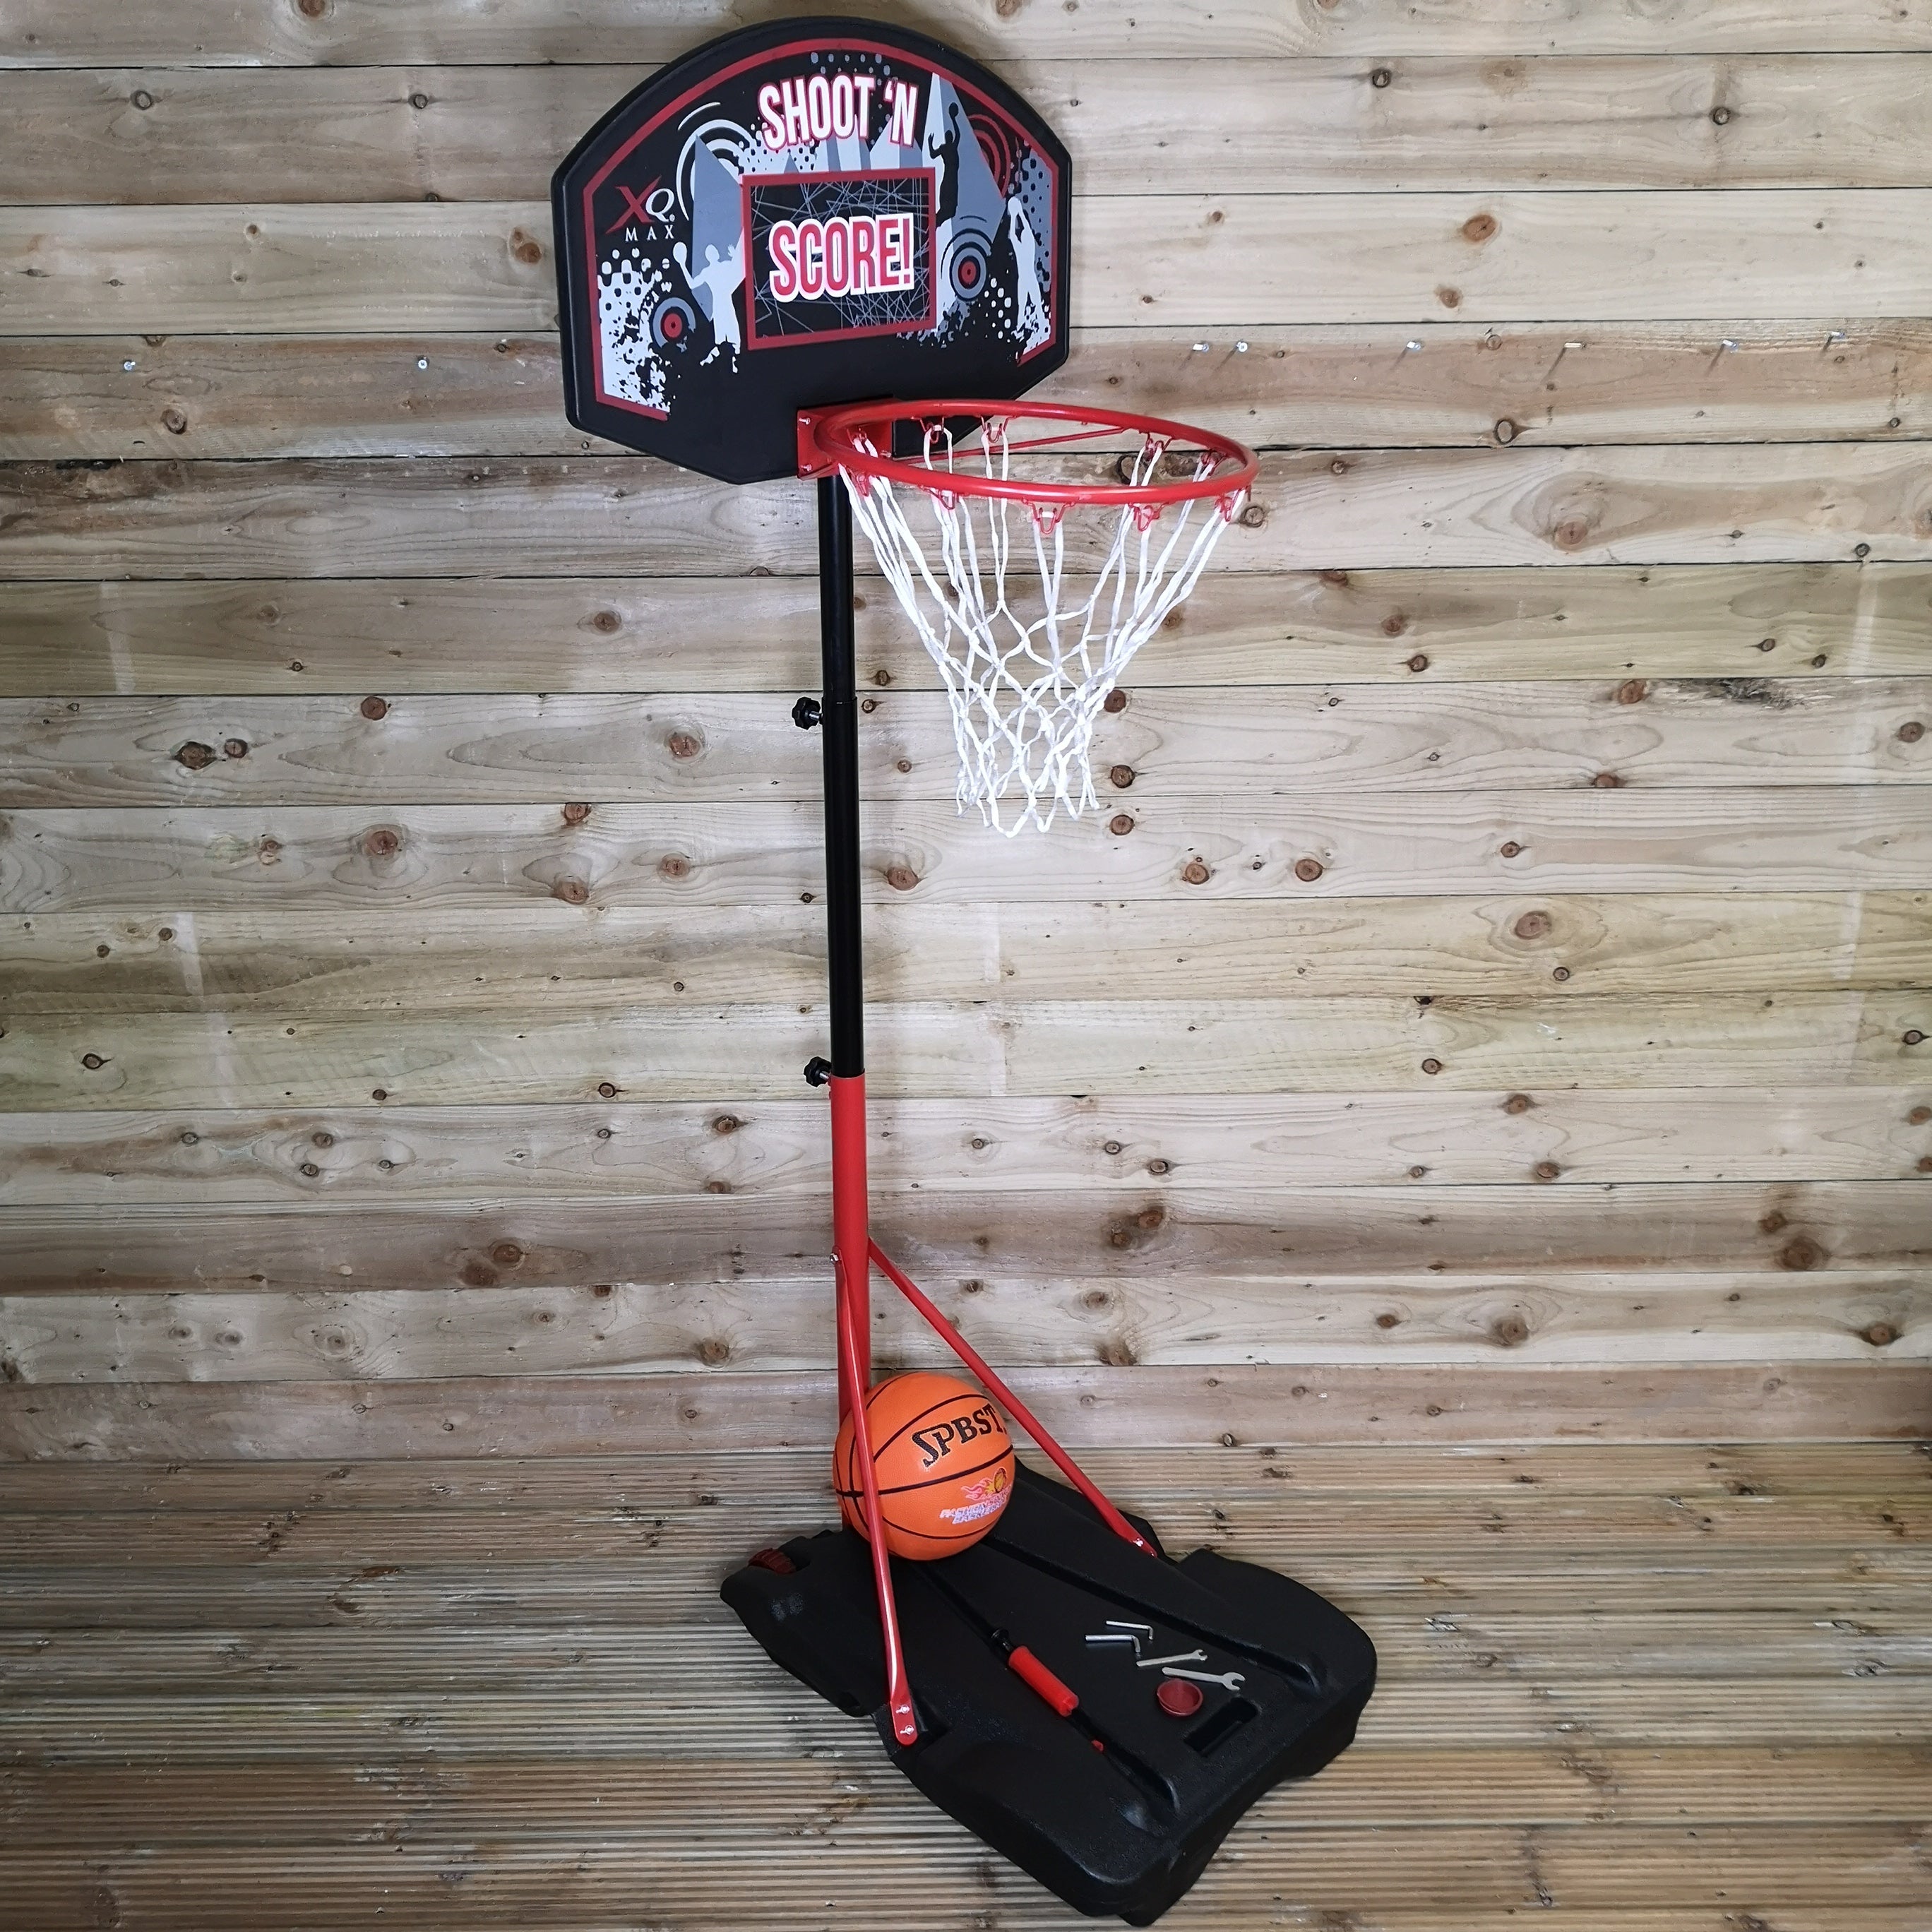 ø45cm 8ft Adjustable Height Portable Freestanding Outdoor Basketball Set with Hoop Net and Ball